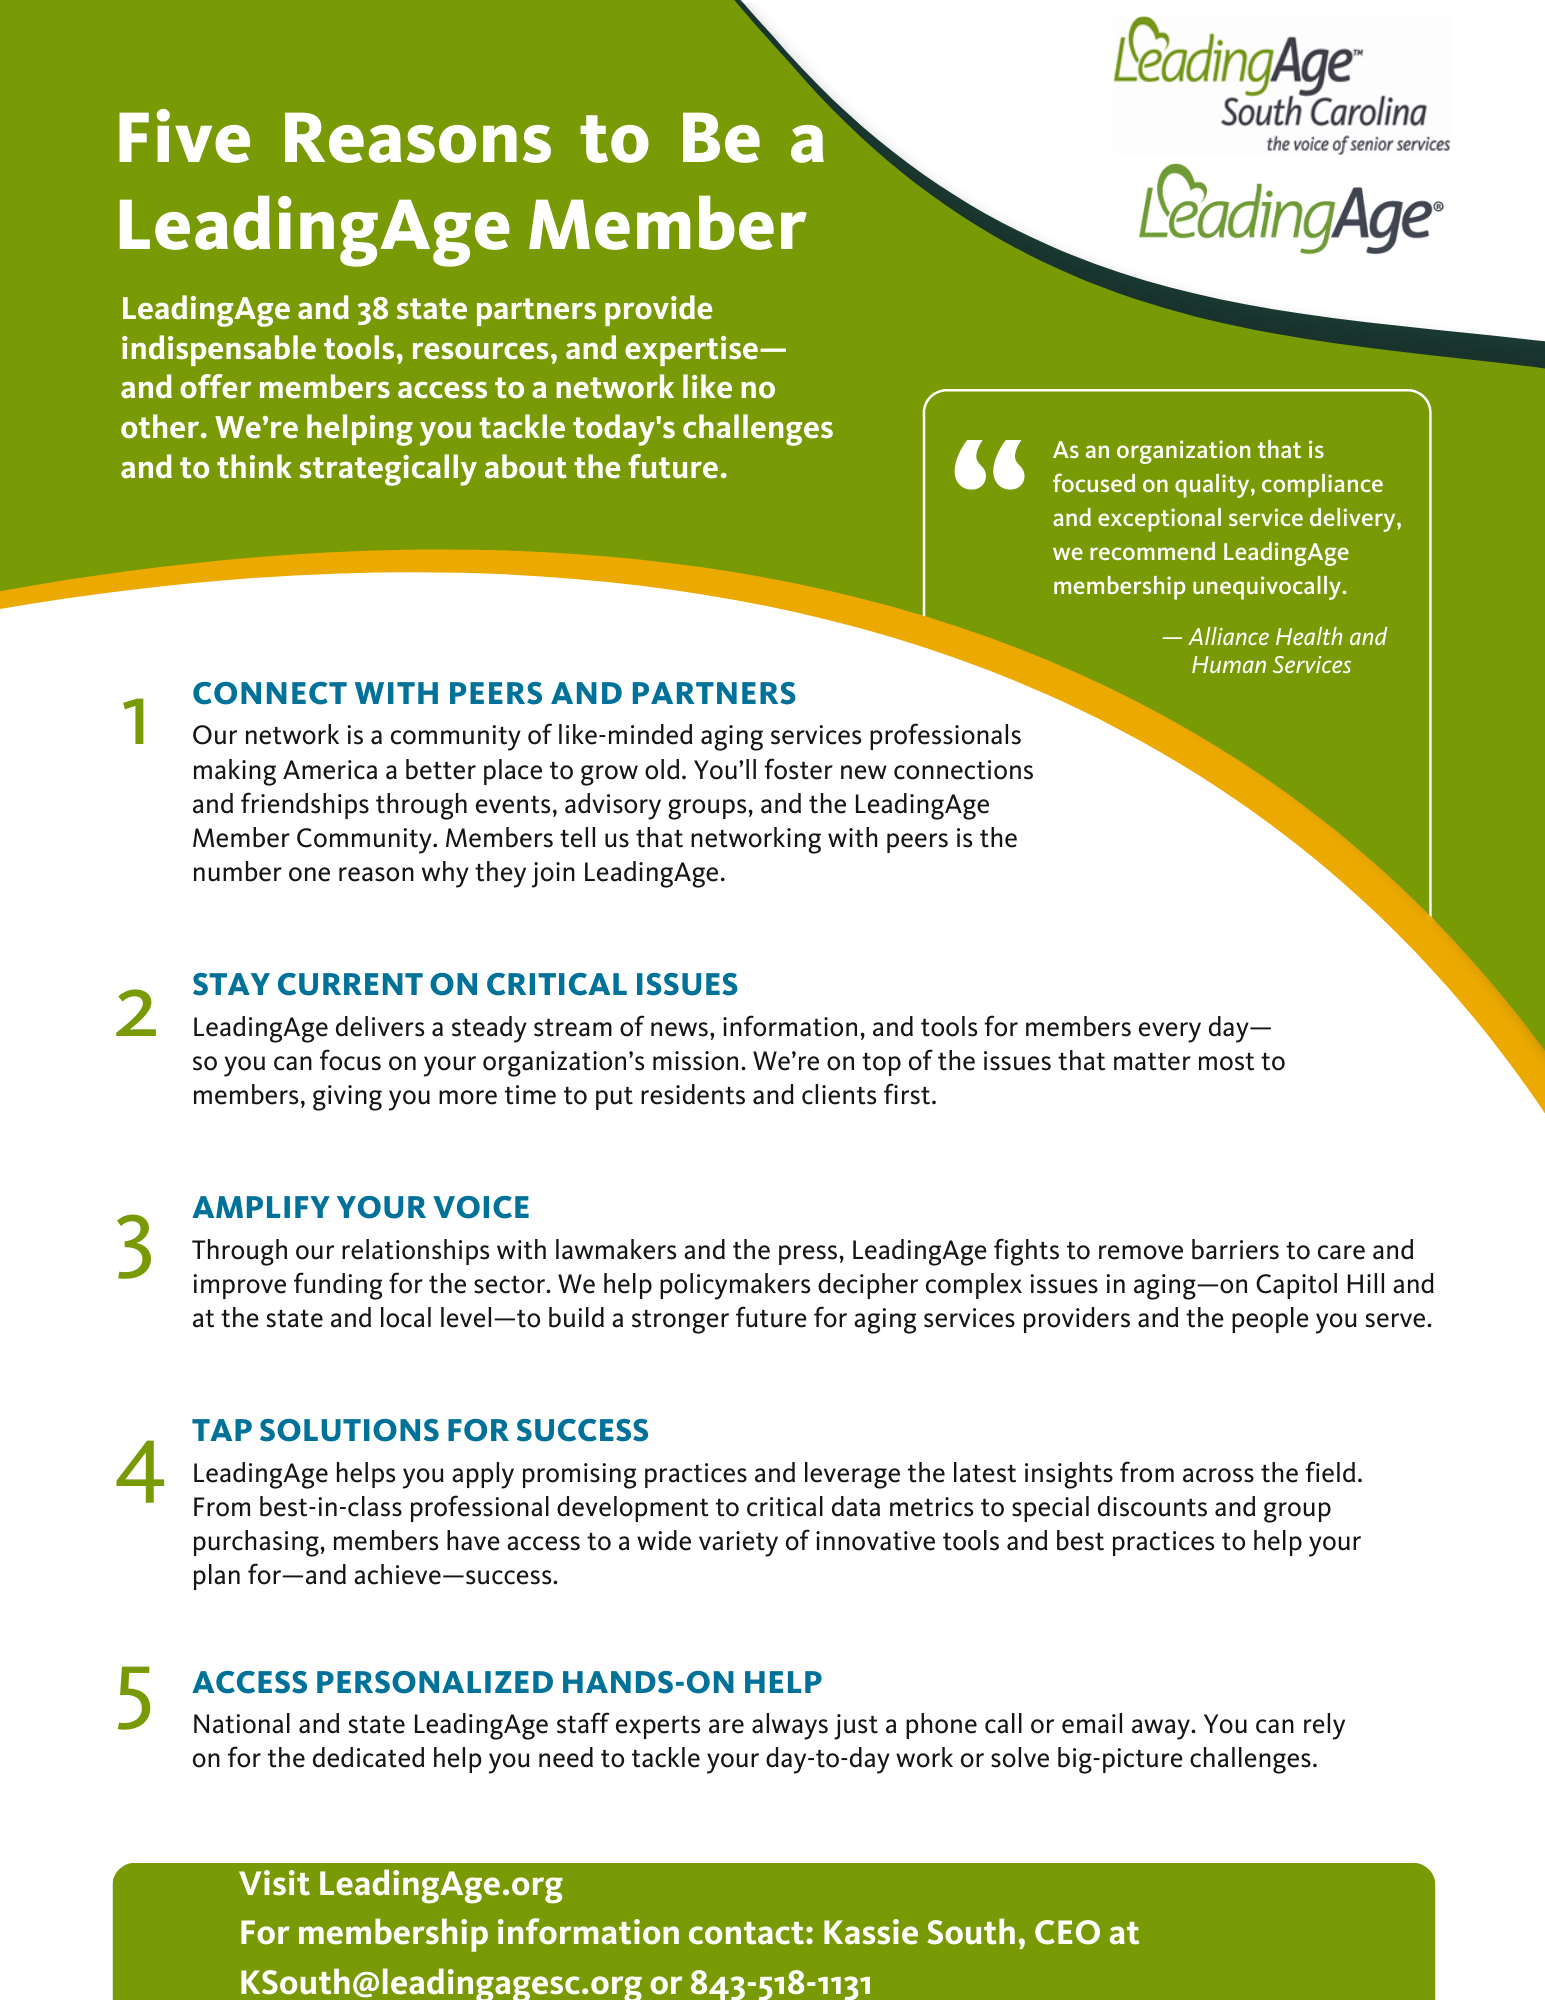 Five Reasons to Join LeadingAge